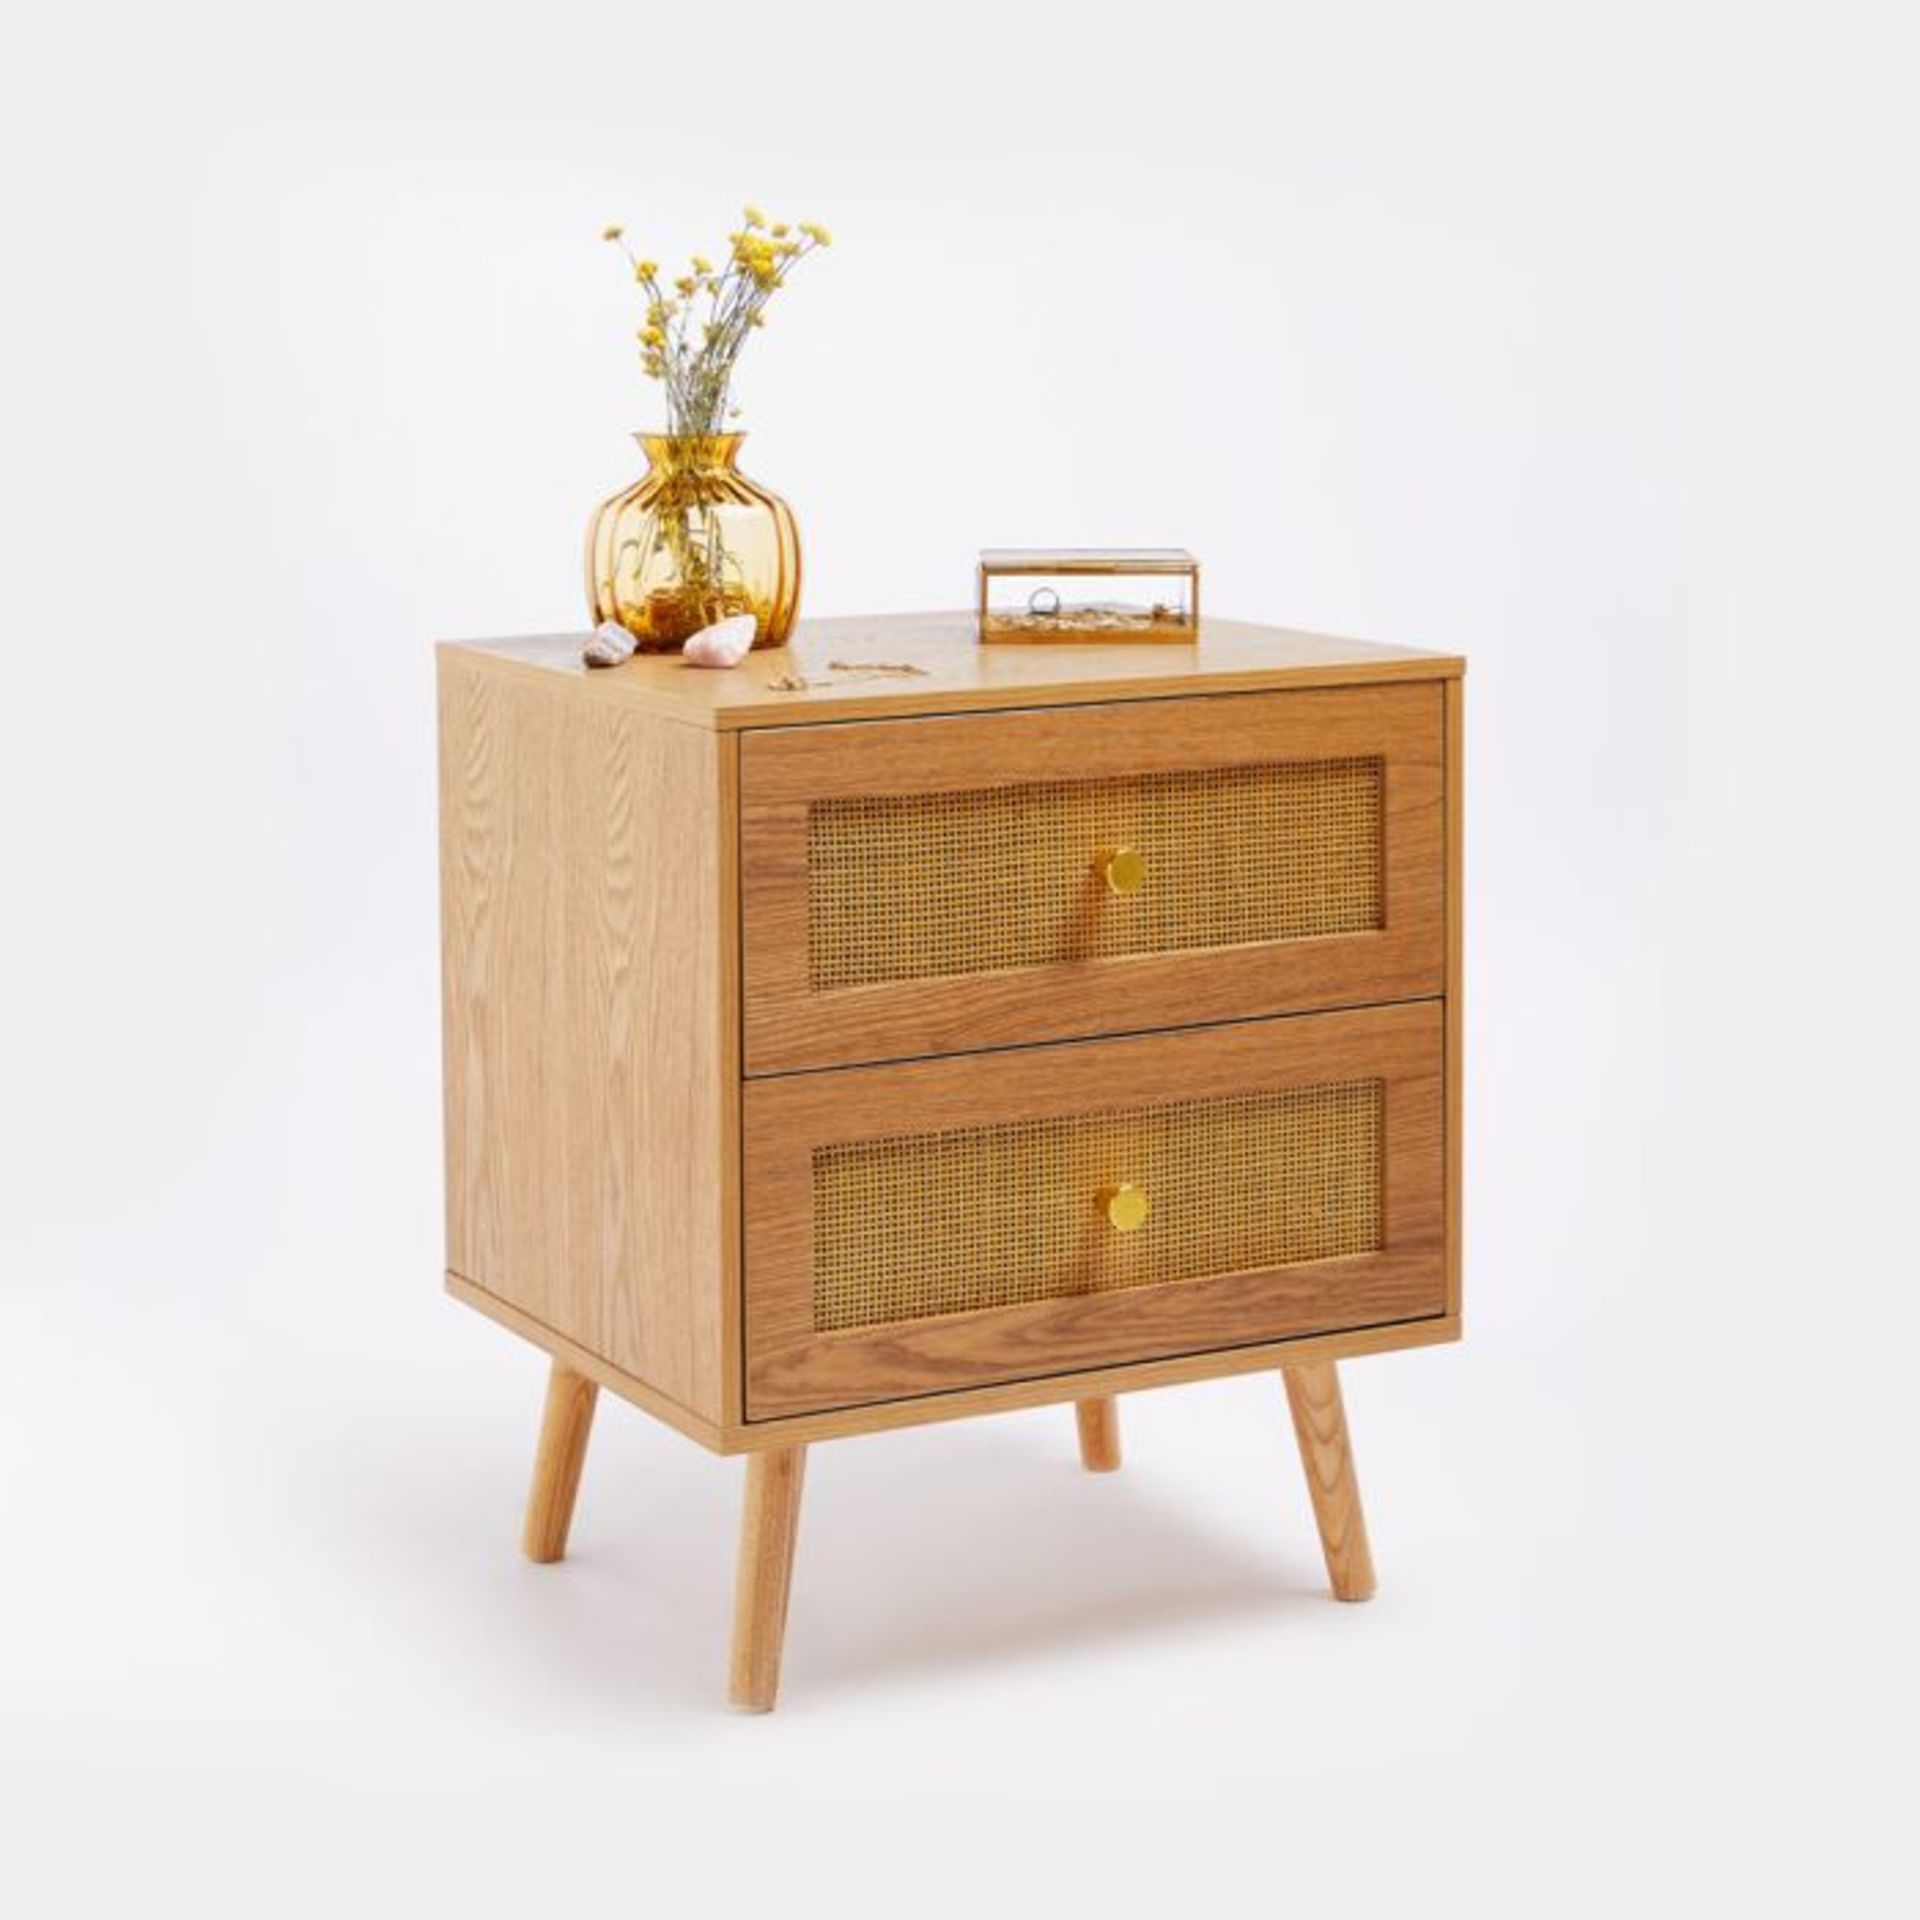 Rattan Bedside Table 2 Drawer. - ER43. Complete with two storage drawers for books, chargers and